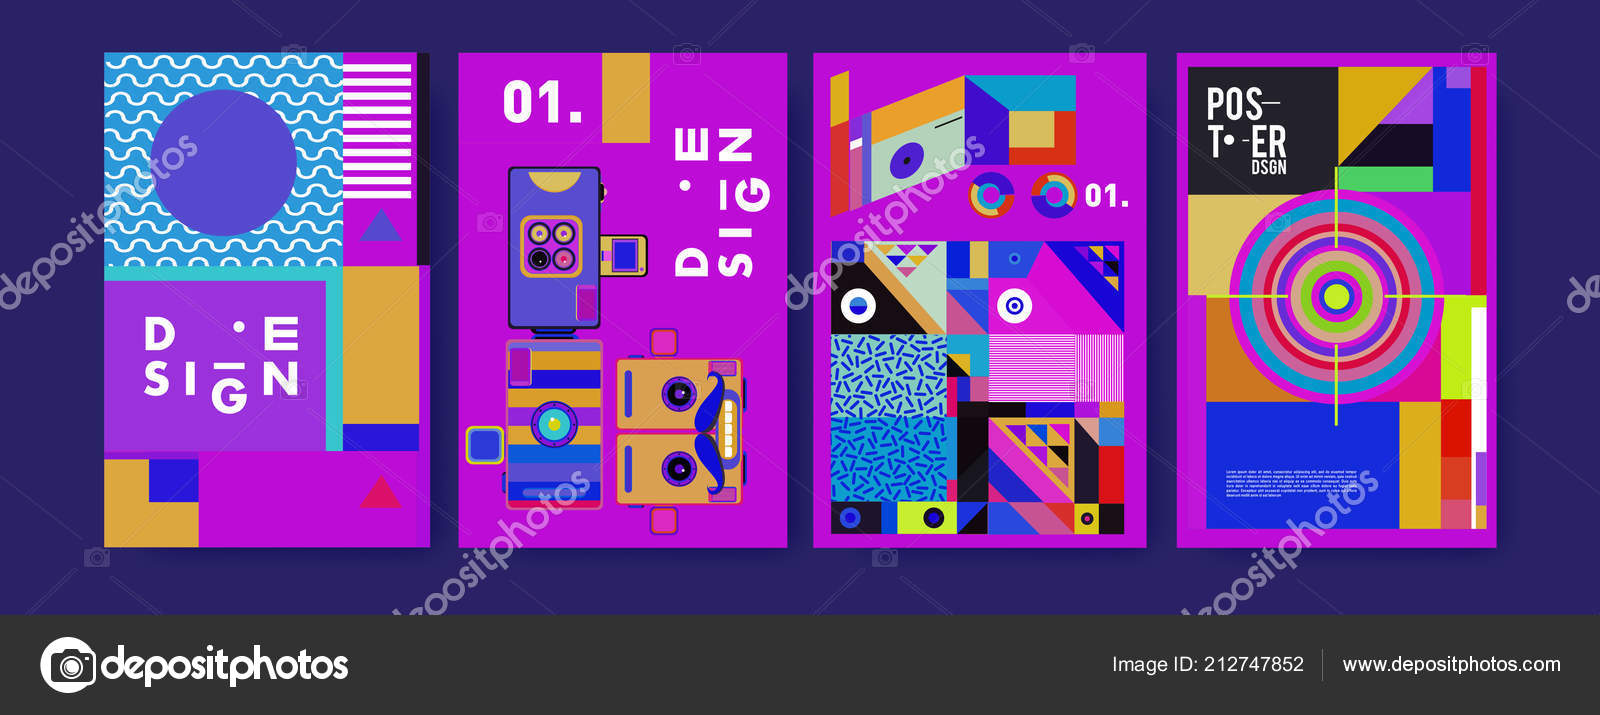 Abstract Colorful Collage Poster Design Template Cool Geometric Fluid Cover Stock Vector C Rebermant